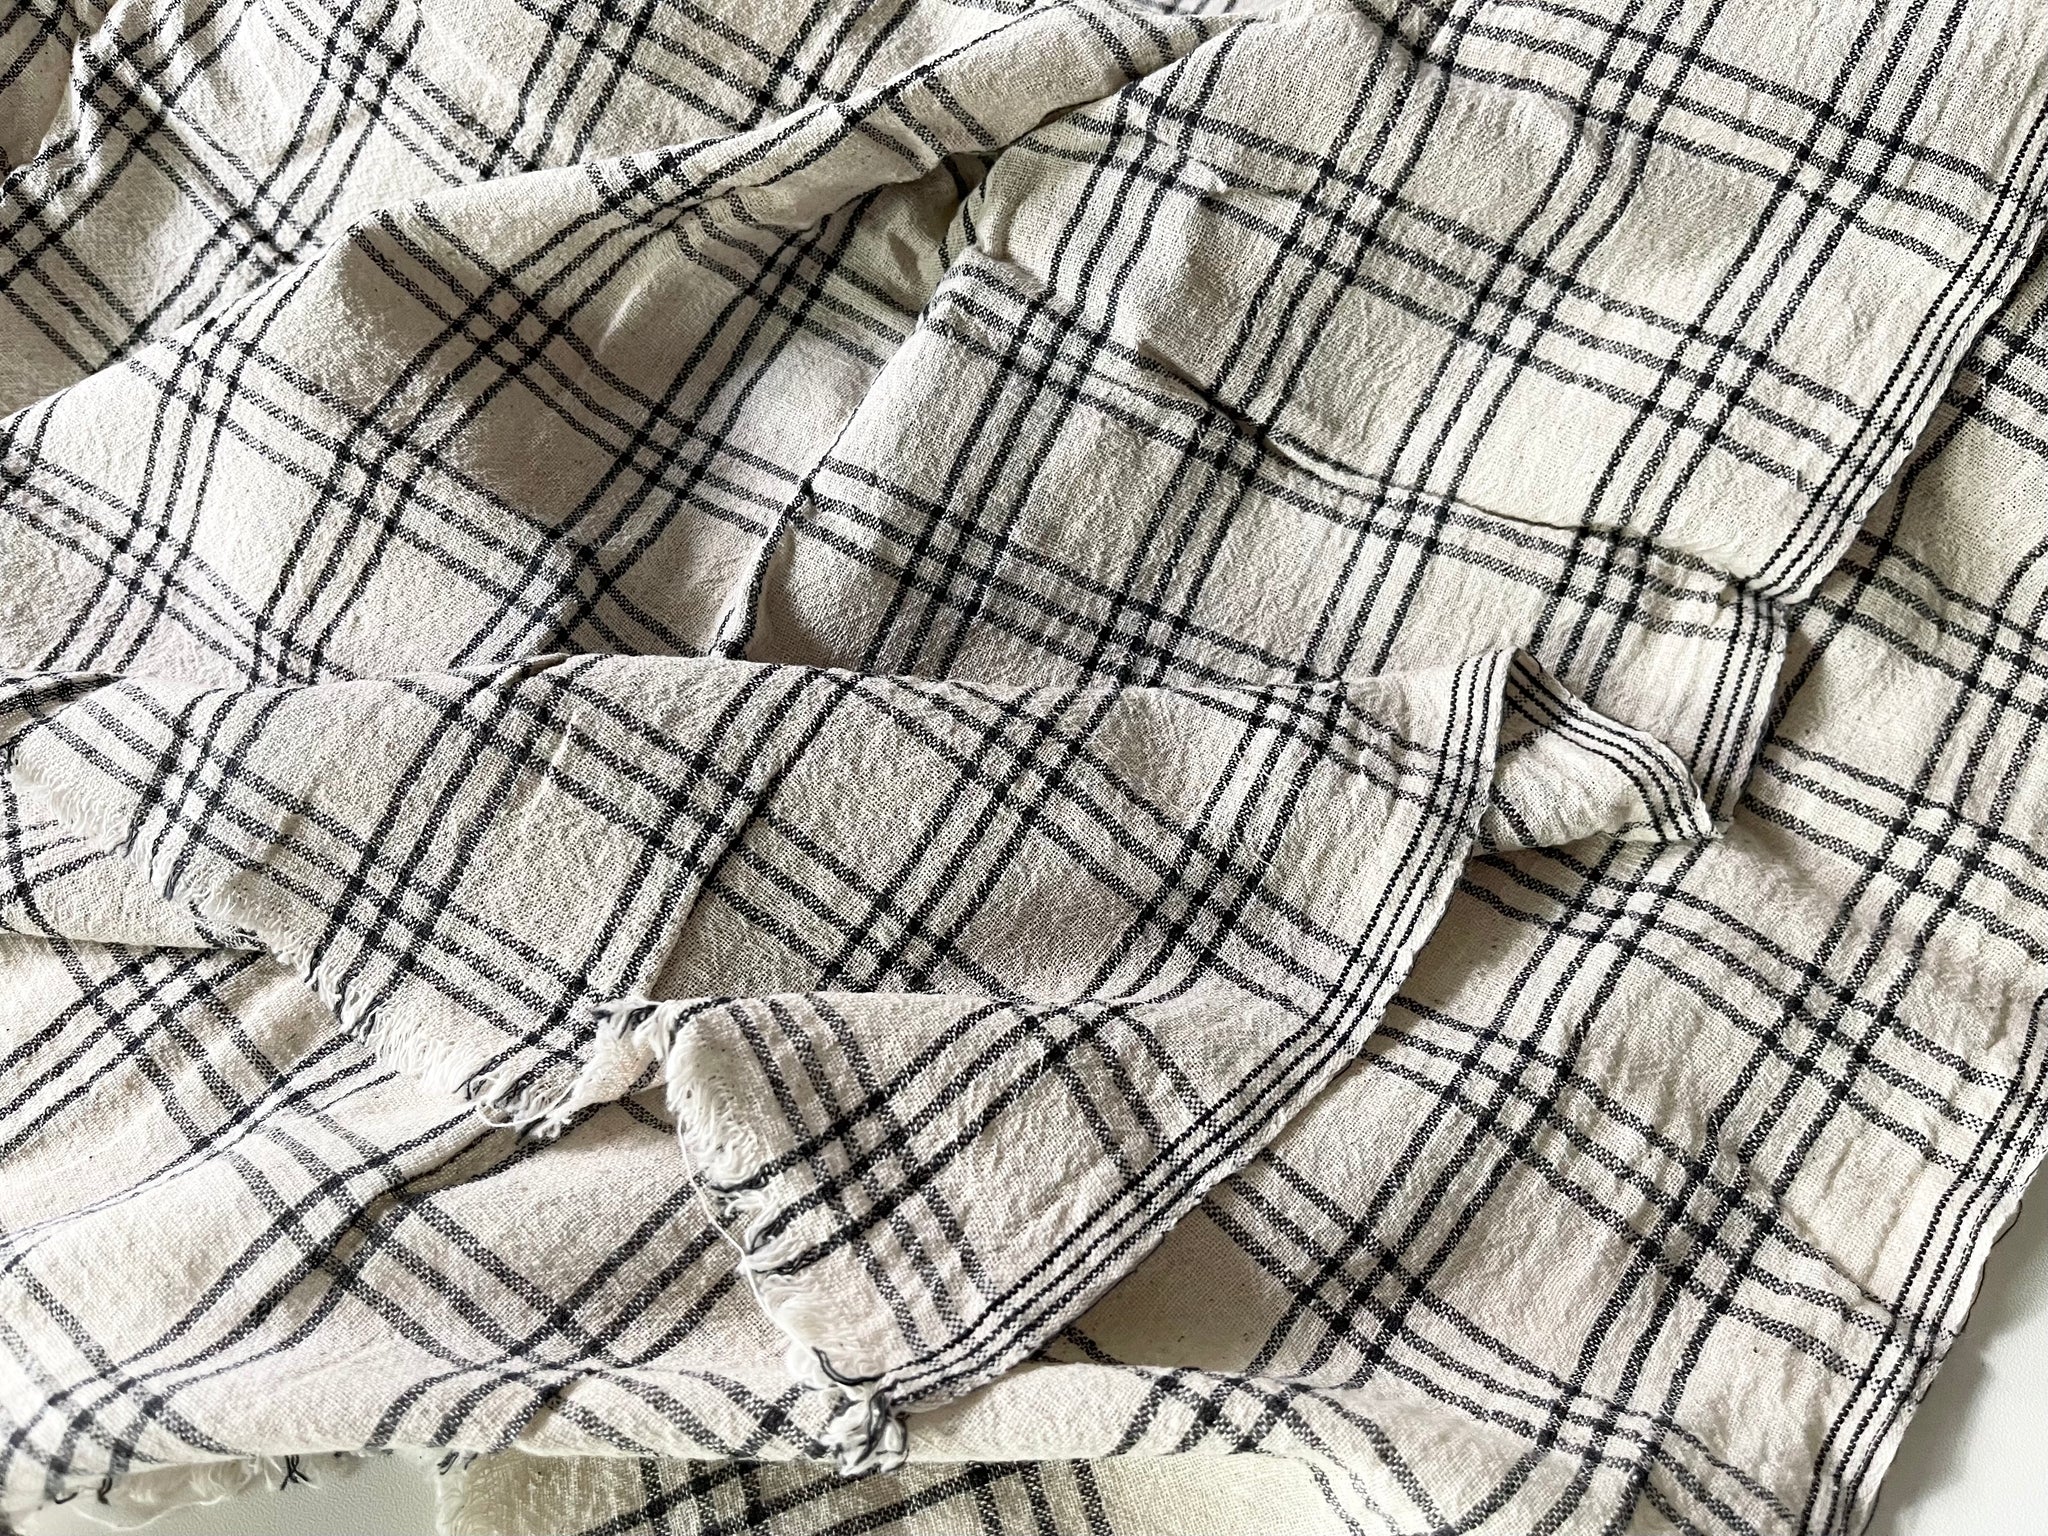 Handwoven Cotton Fabric - Natural and Black Grid Check